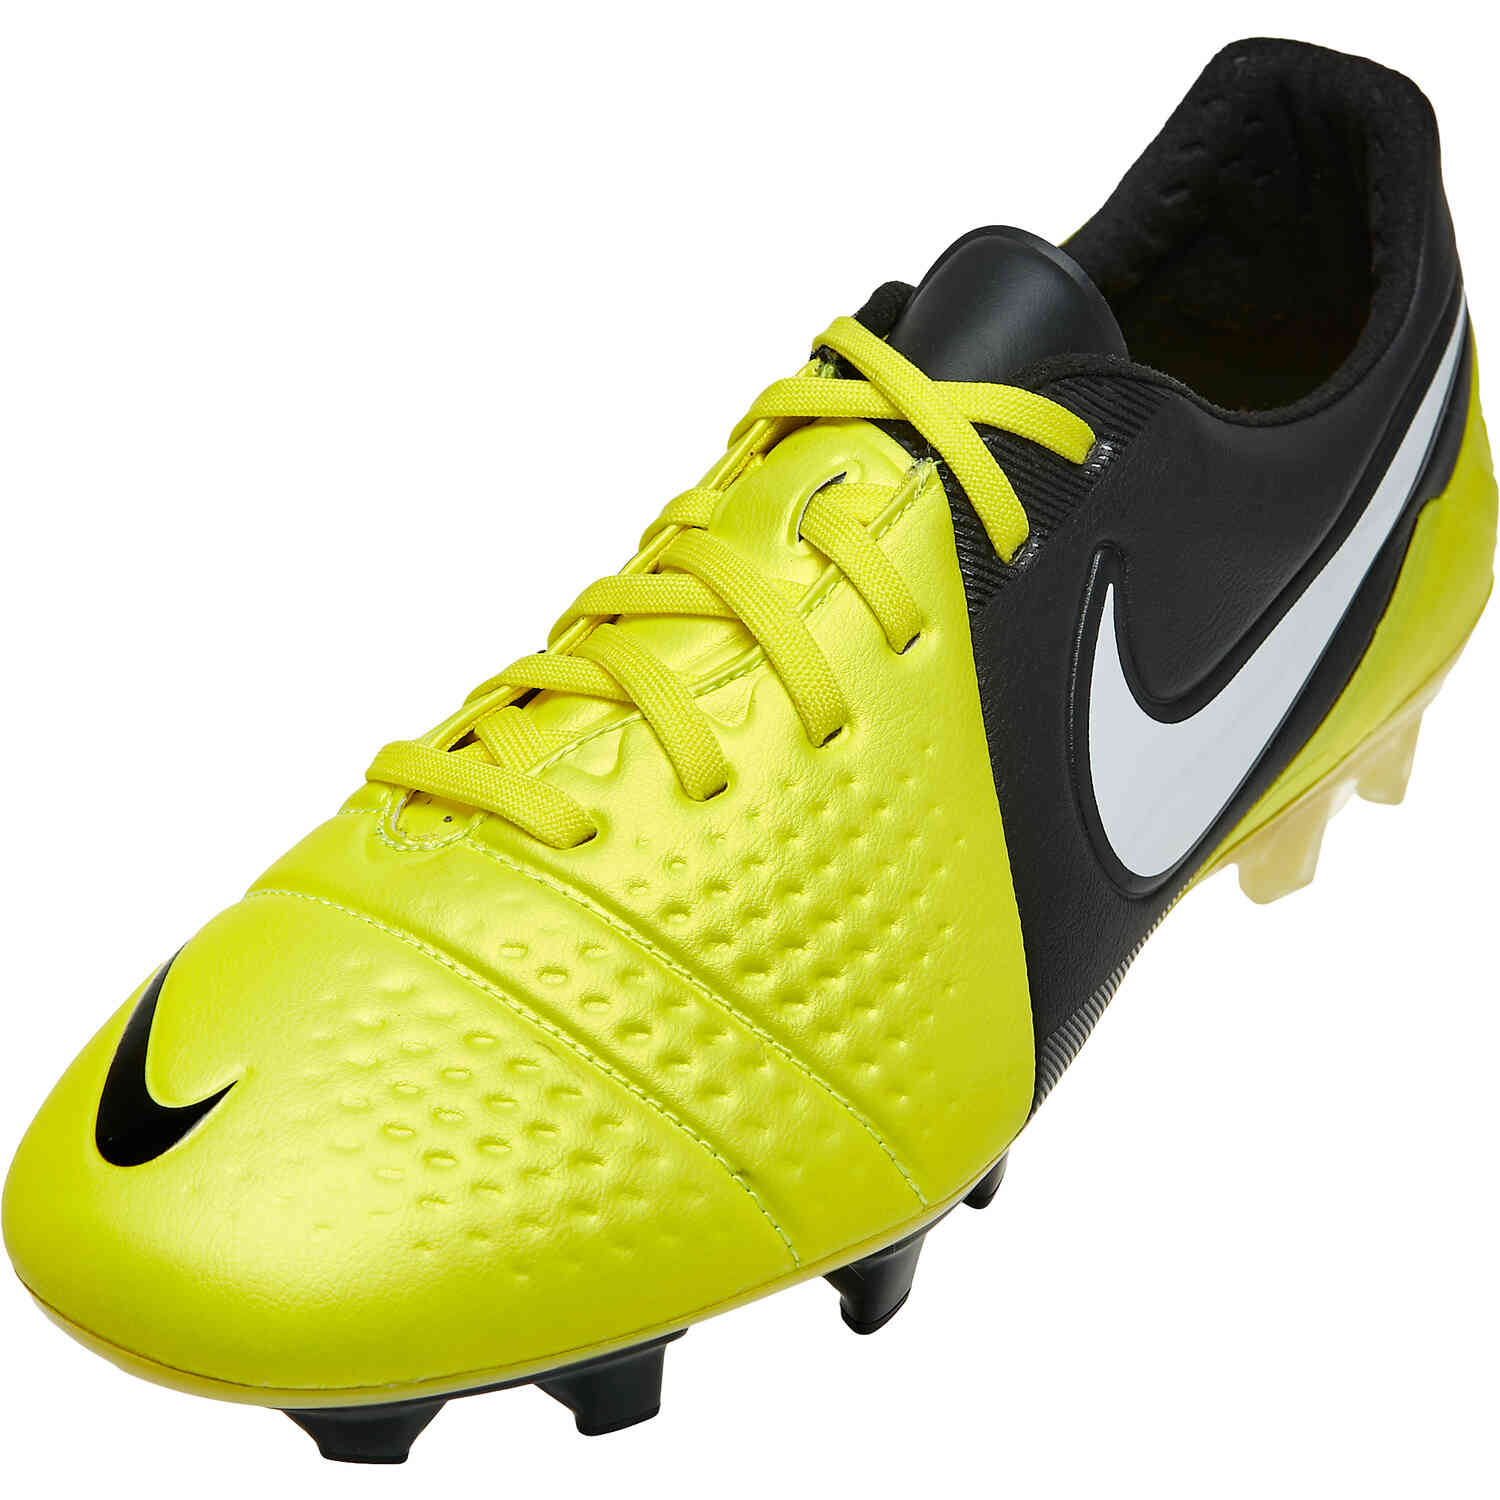 Landsdækkende Nogen Pacific Nike Special Edition CTR360 Maestri III FG - Tour Yellow & Black with White  - SoccerPro